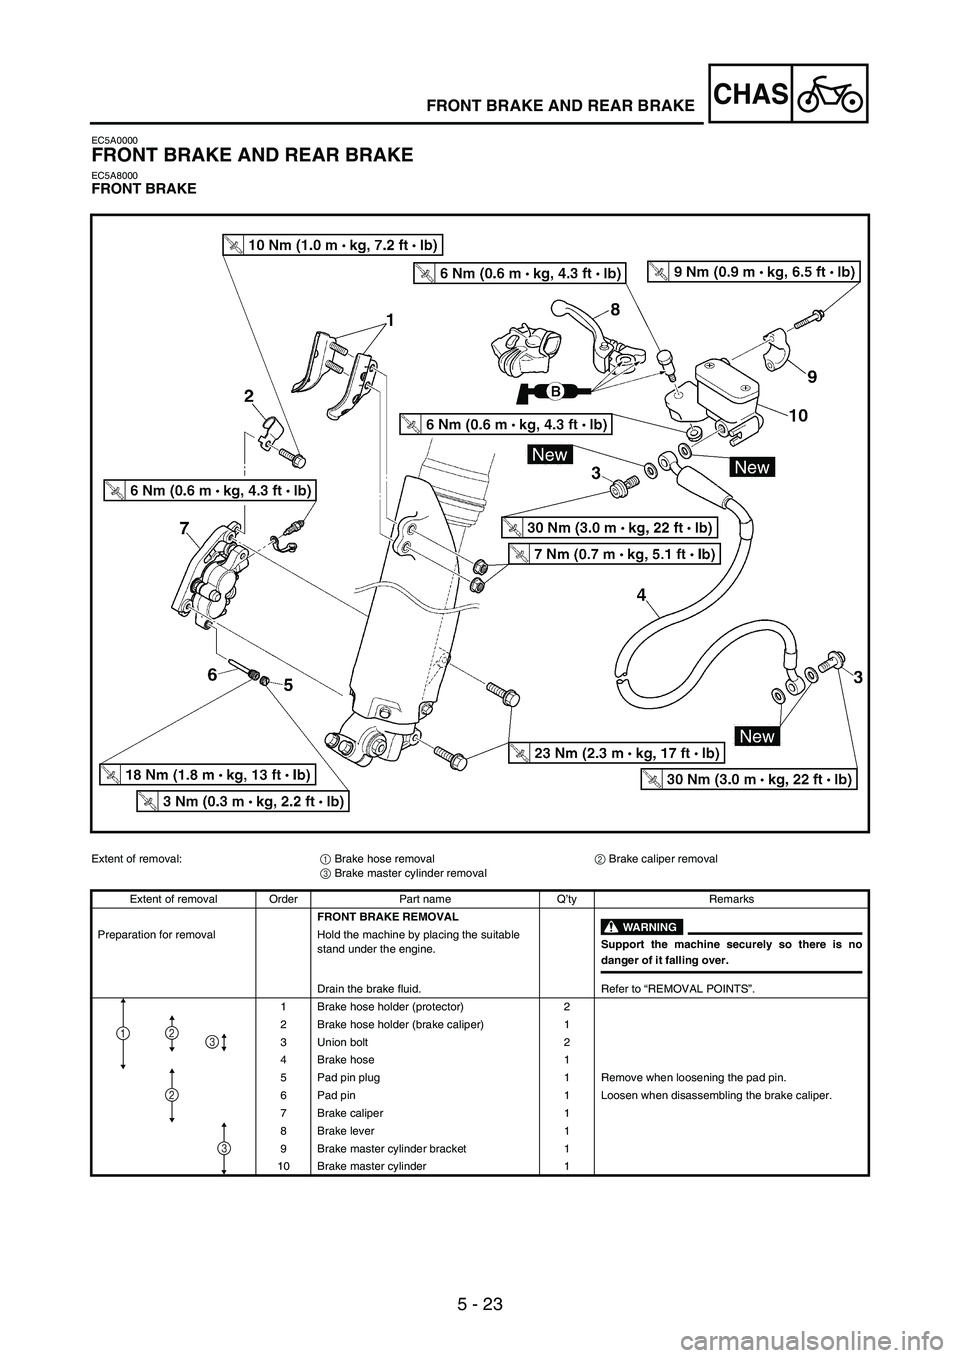 YAMAHA WR 250F 2006  Notices Demploi (in French) 5 - 23
CHASFRONT BRAKE AND REAR BRAKE
EC5A0000
FRONT BRAKE AND REAR BRAKE
EC5A8000FRONT BRAKE
Extent of removal:
1 Brake hose removal
2 Brake caliper removal
3 Brake master cylinder removal
Extent of 